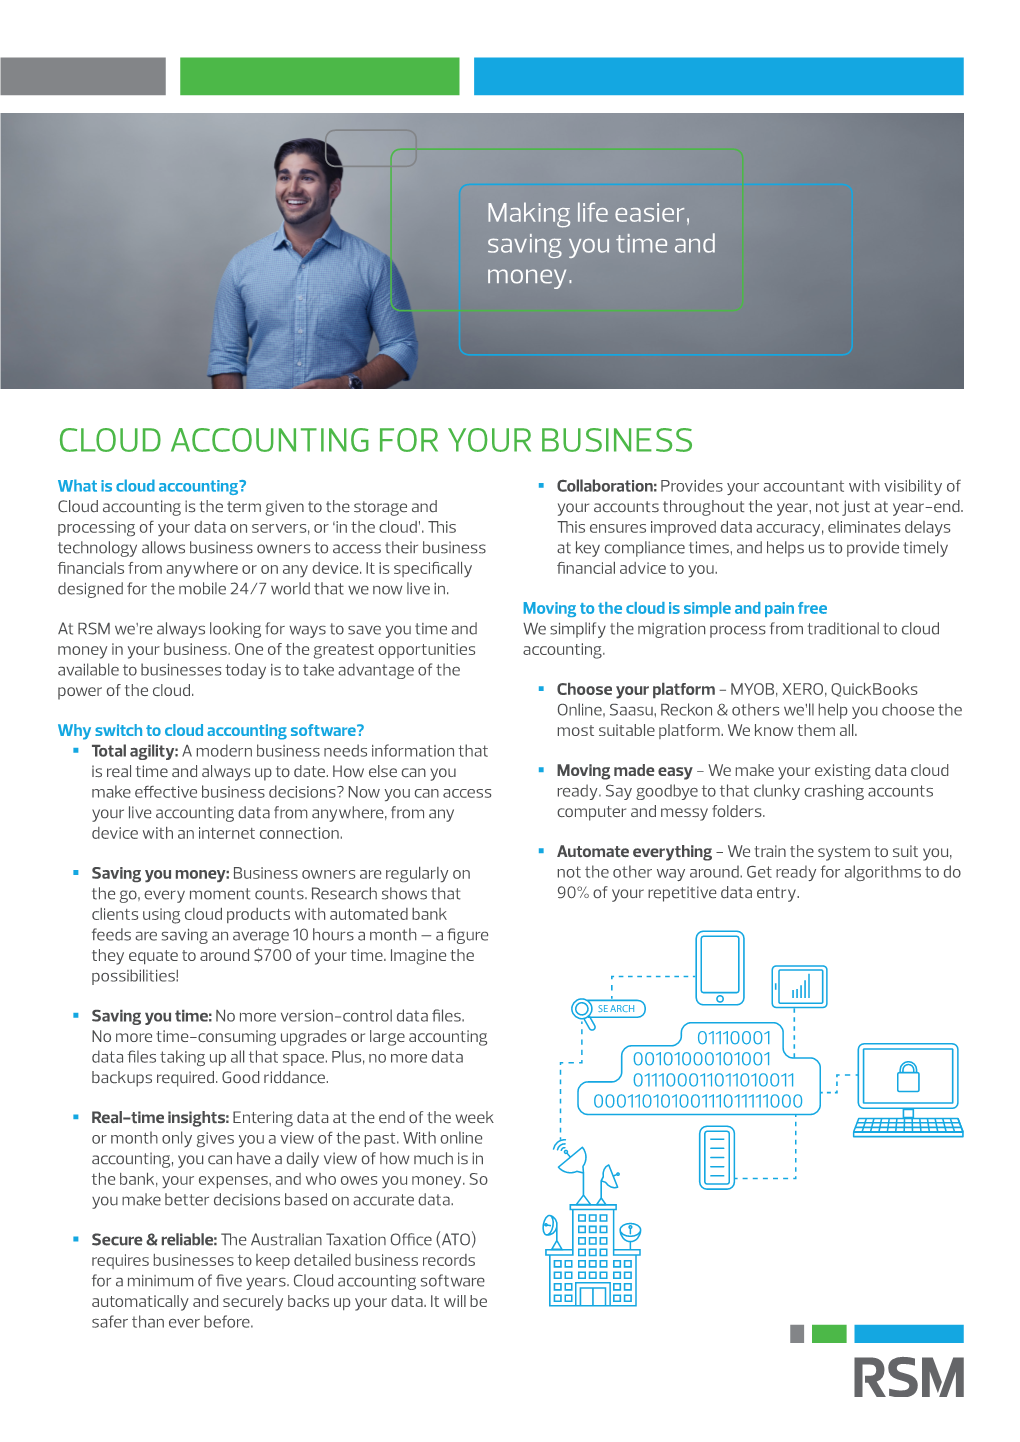 Cloud Accounting for Your Business